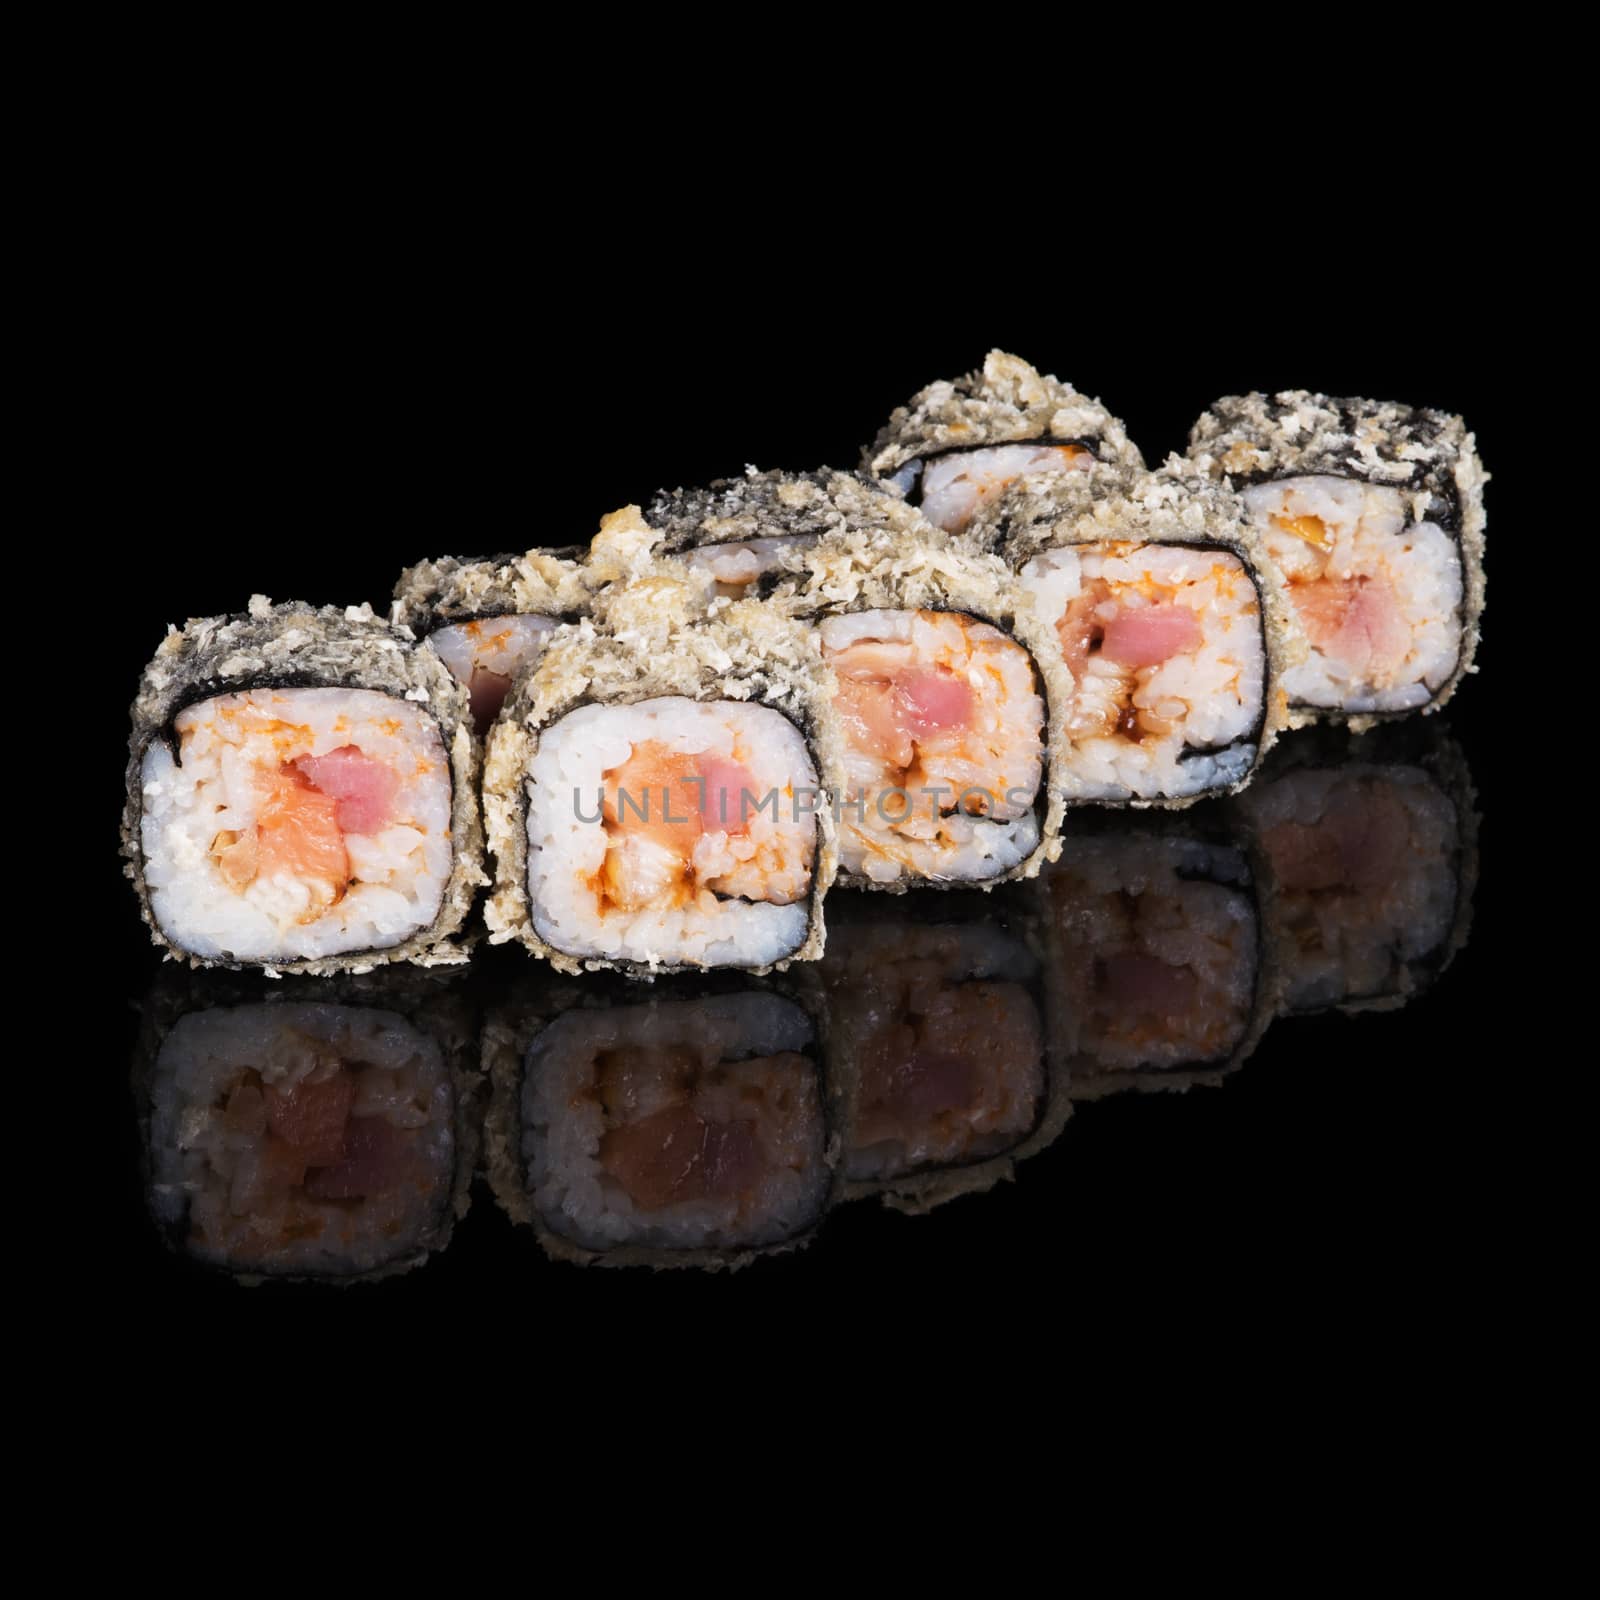 Grilled sushi rolls with salmon, tuna and eel on black background